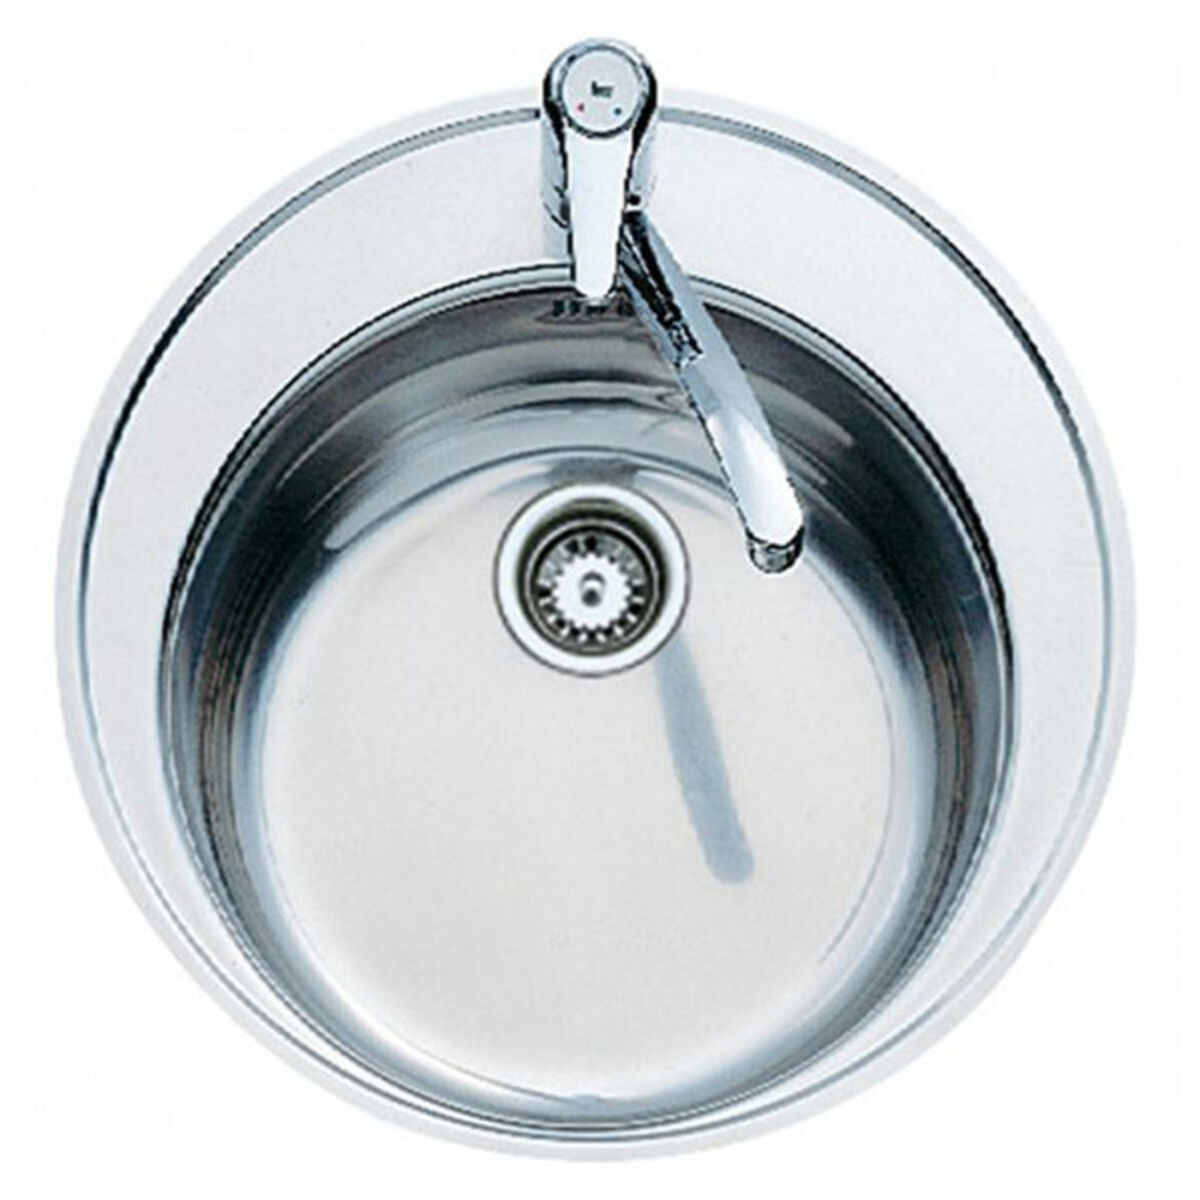 Sink with One Basin Teka Stainless steel